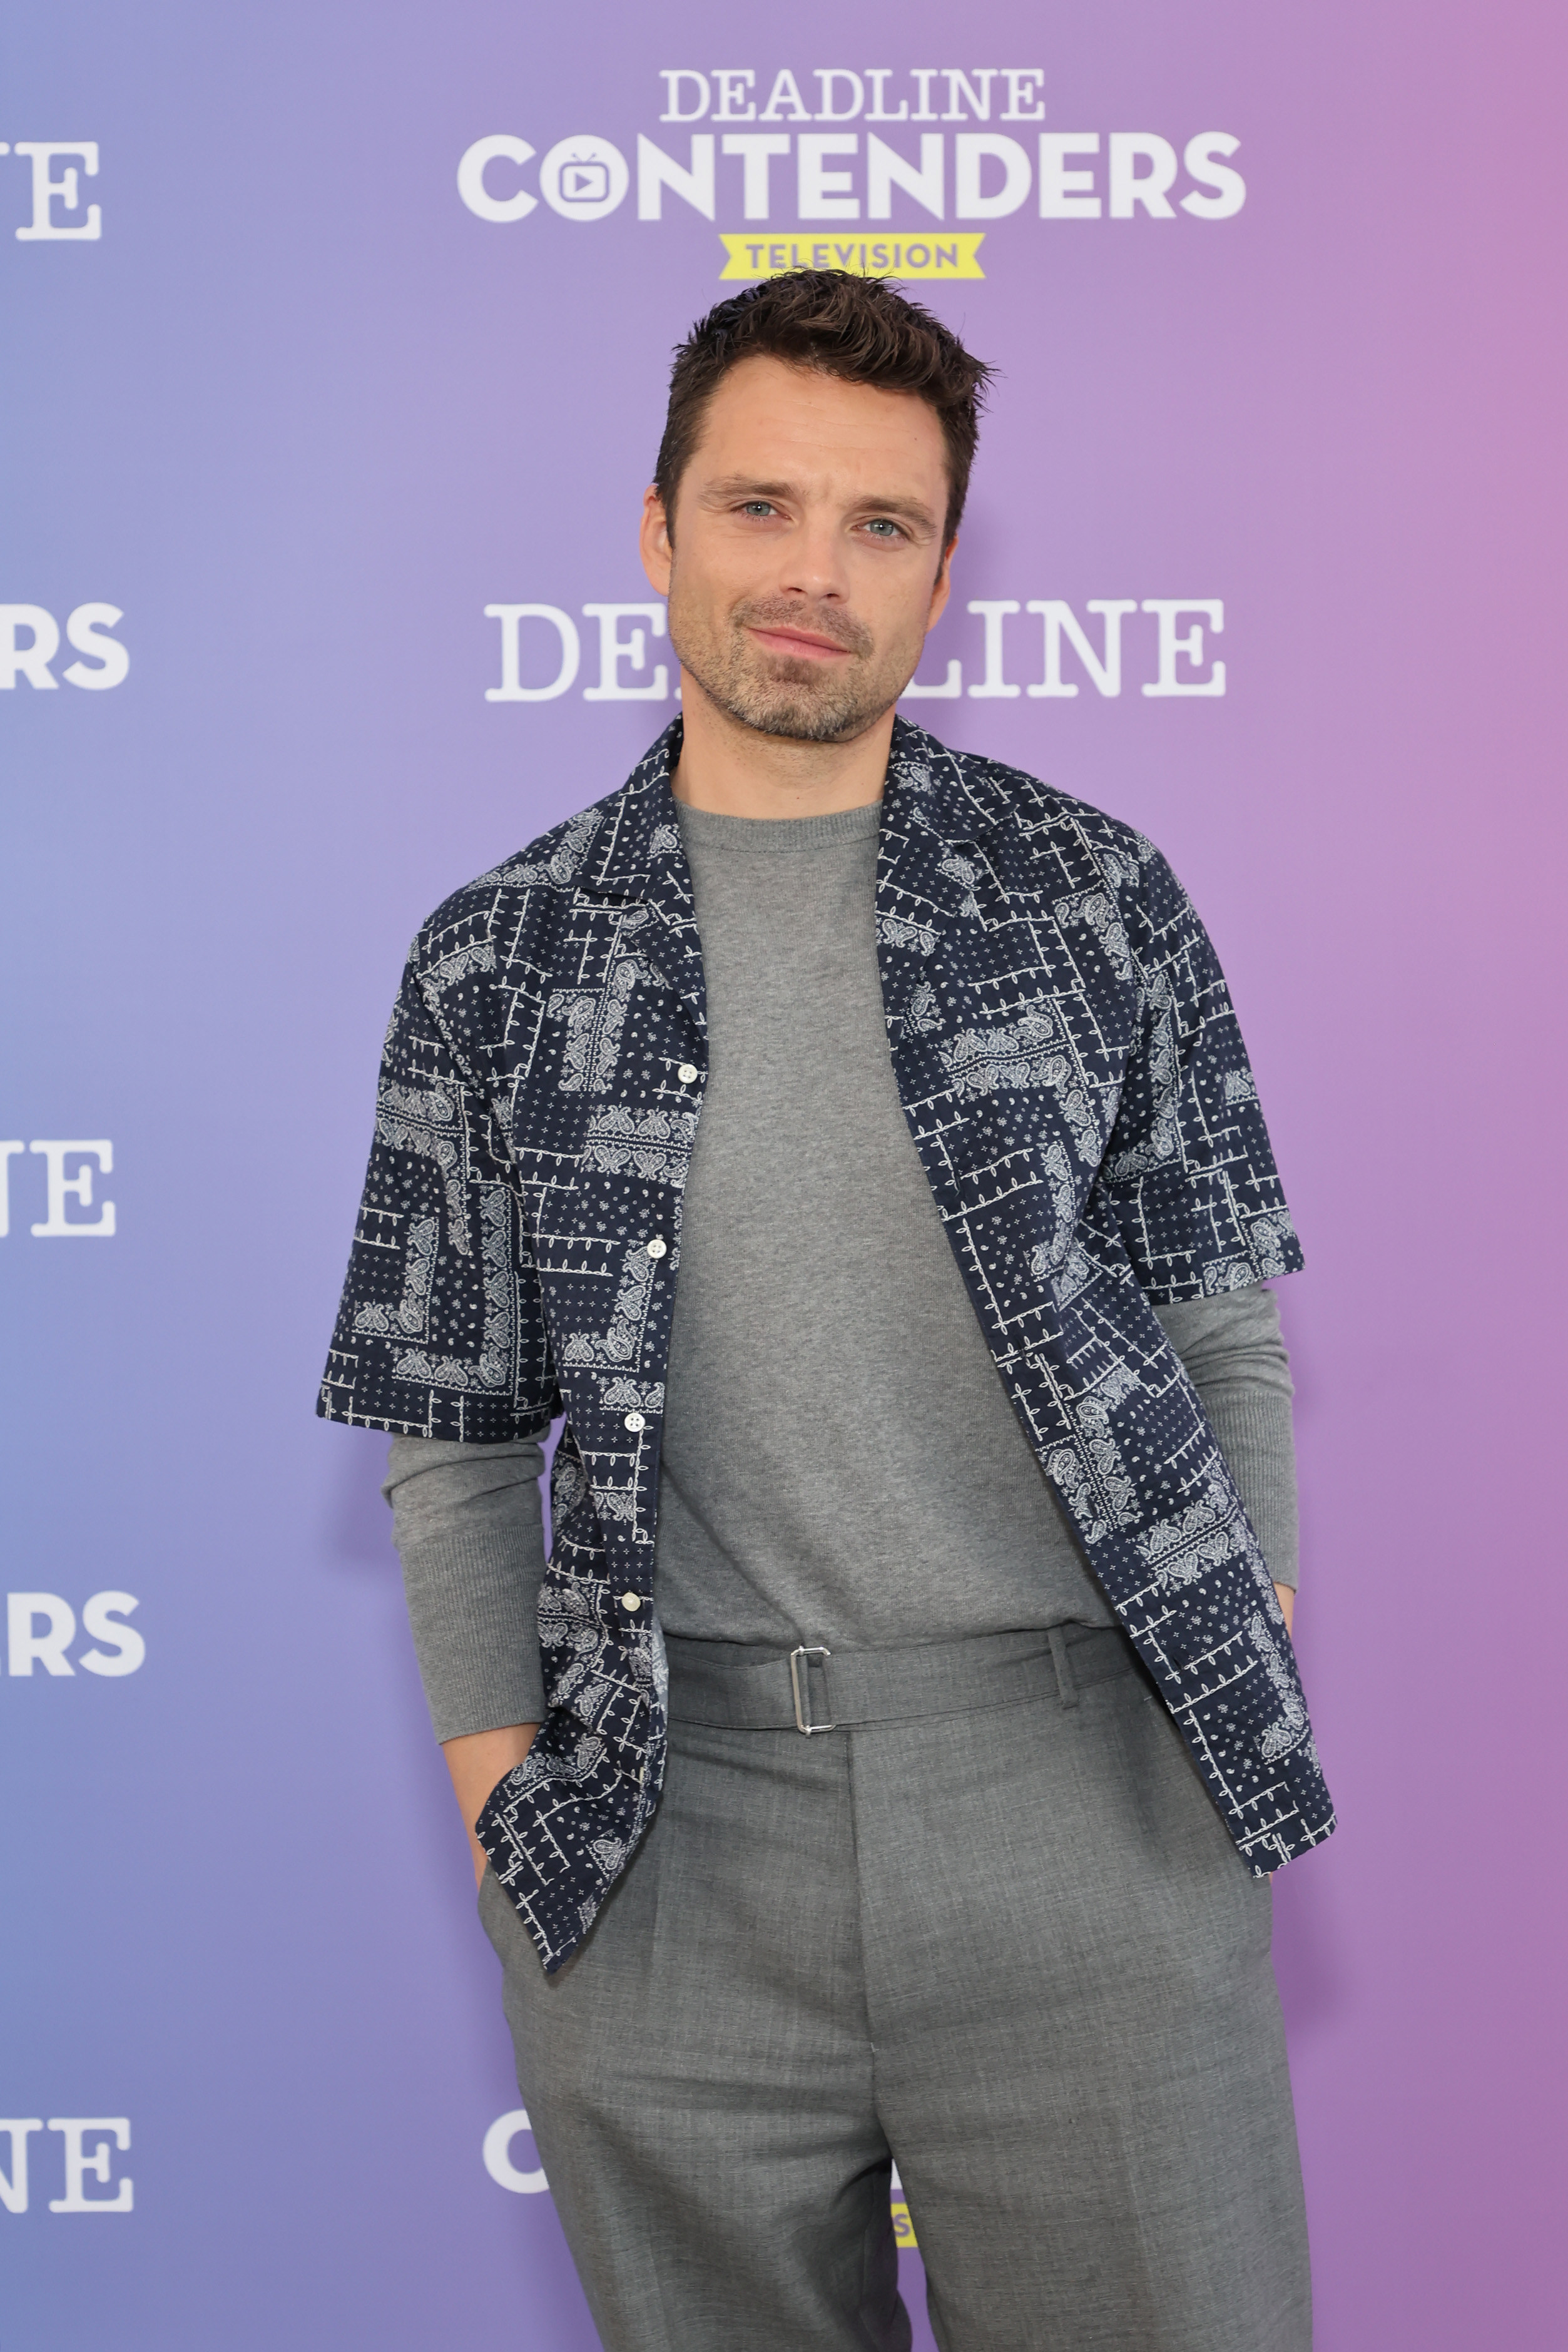 Sebastian on the red carpet in casual pants, top, and overshirt